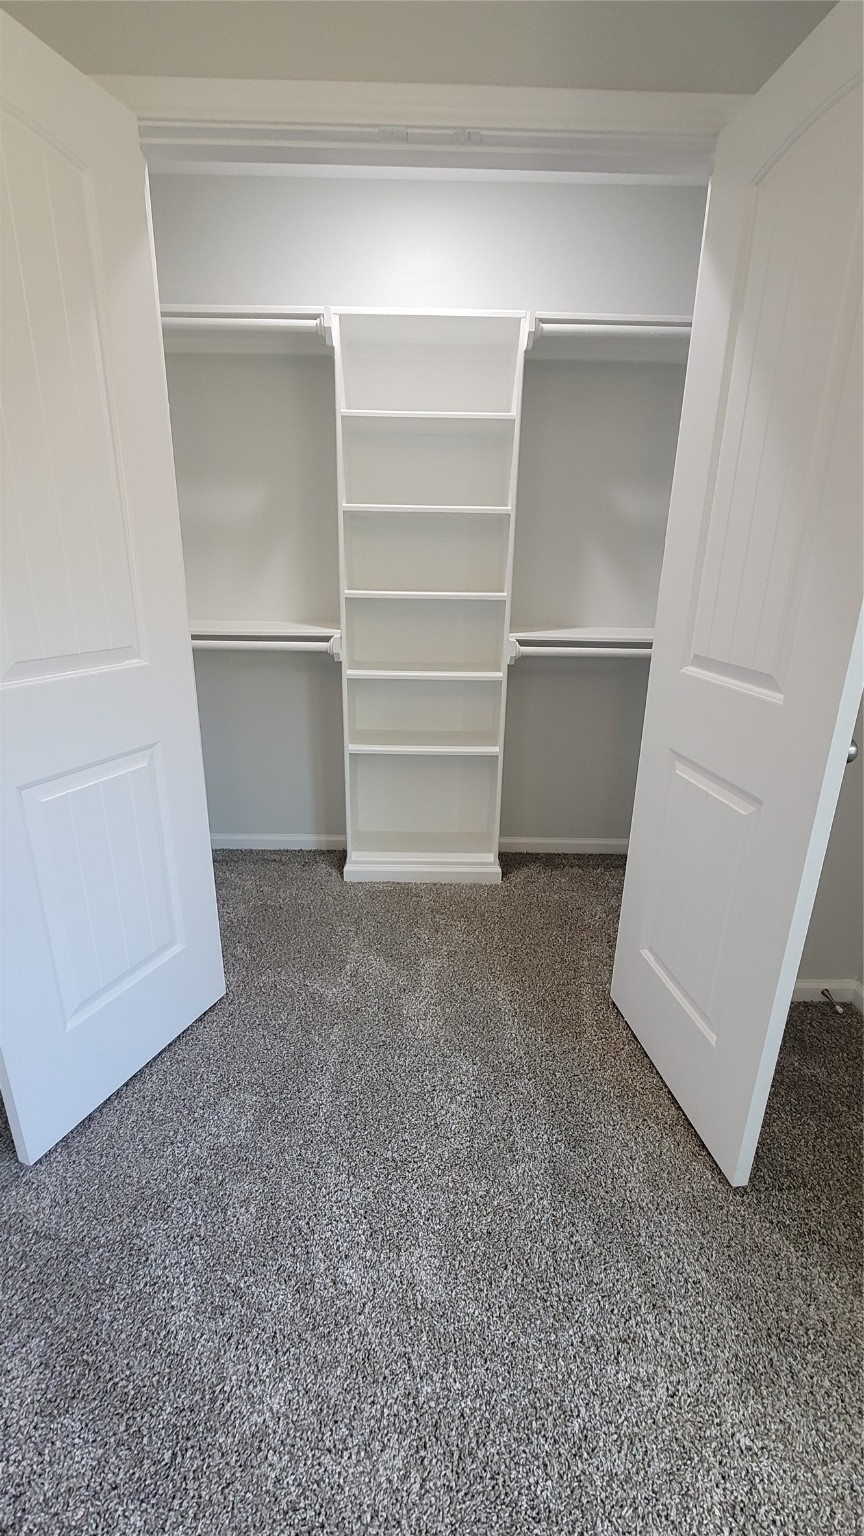 Big closet space with built in shelves for your convenience!